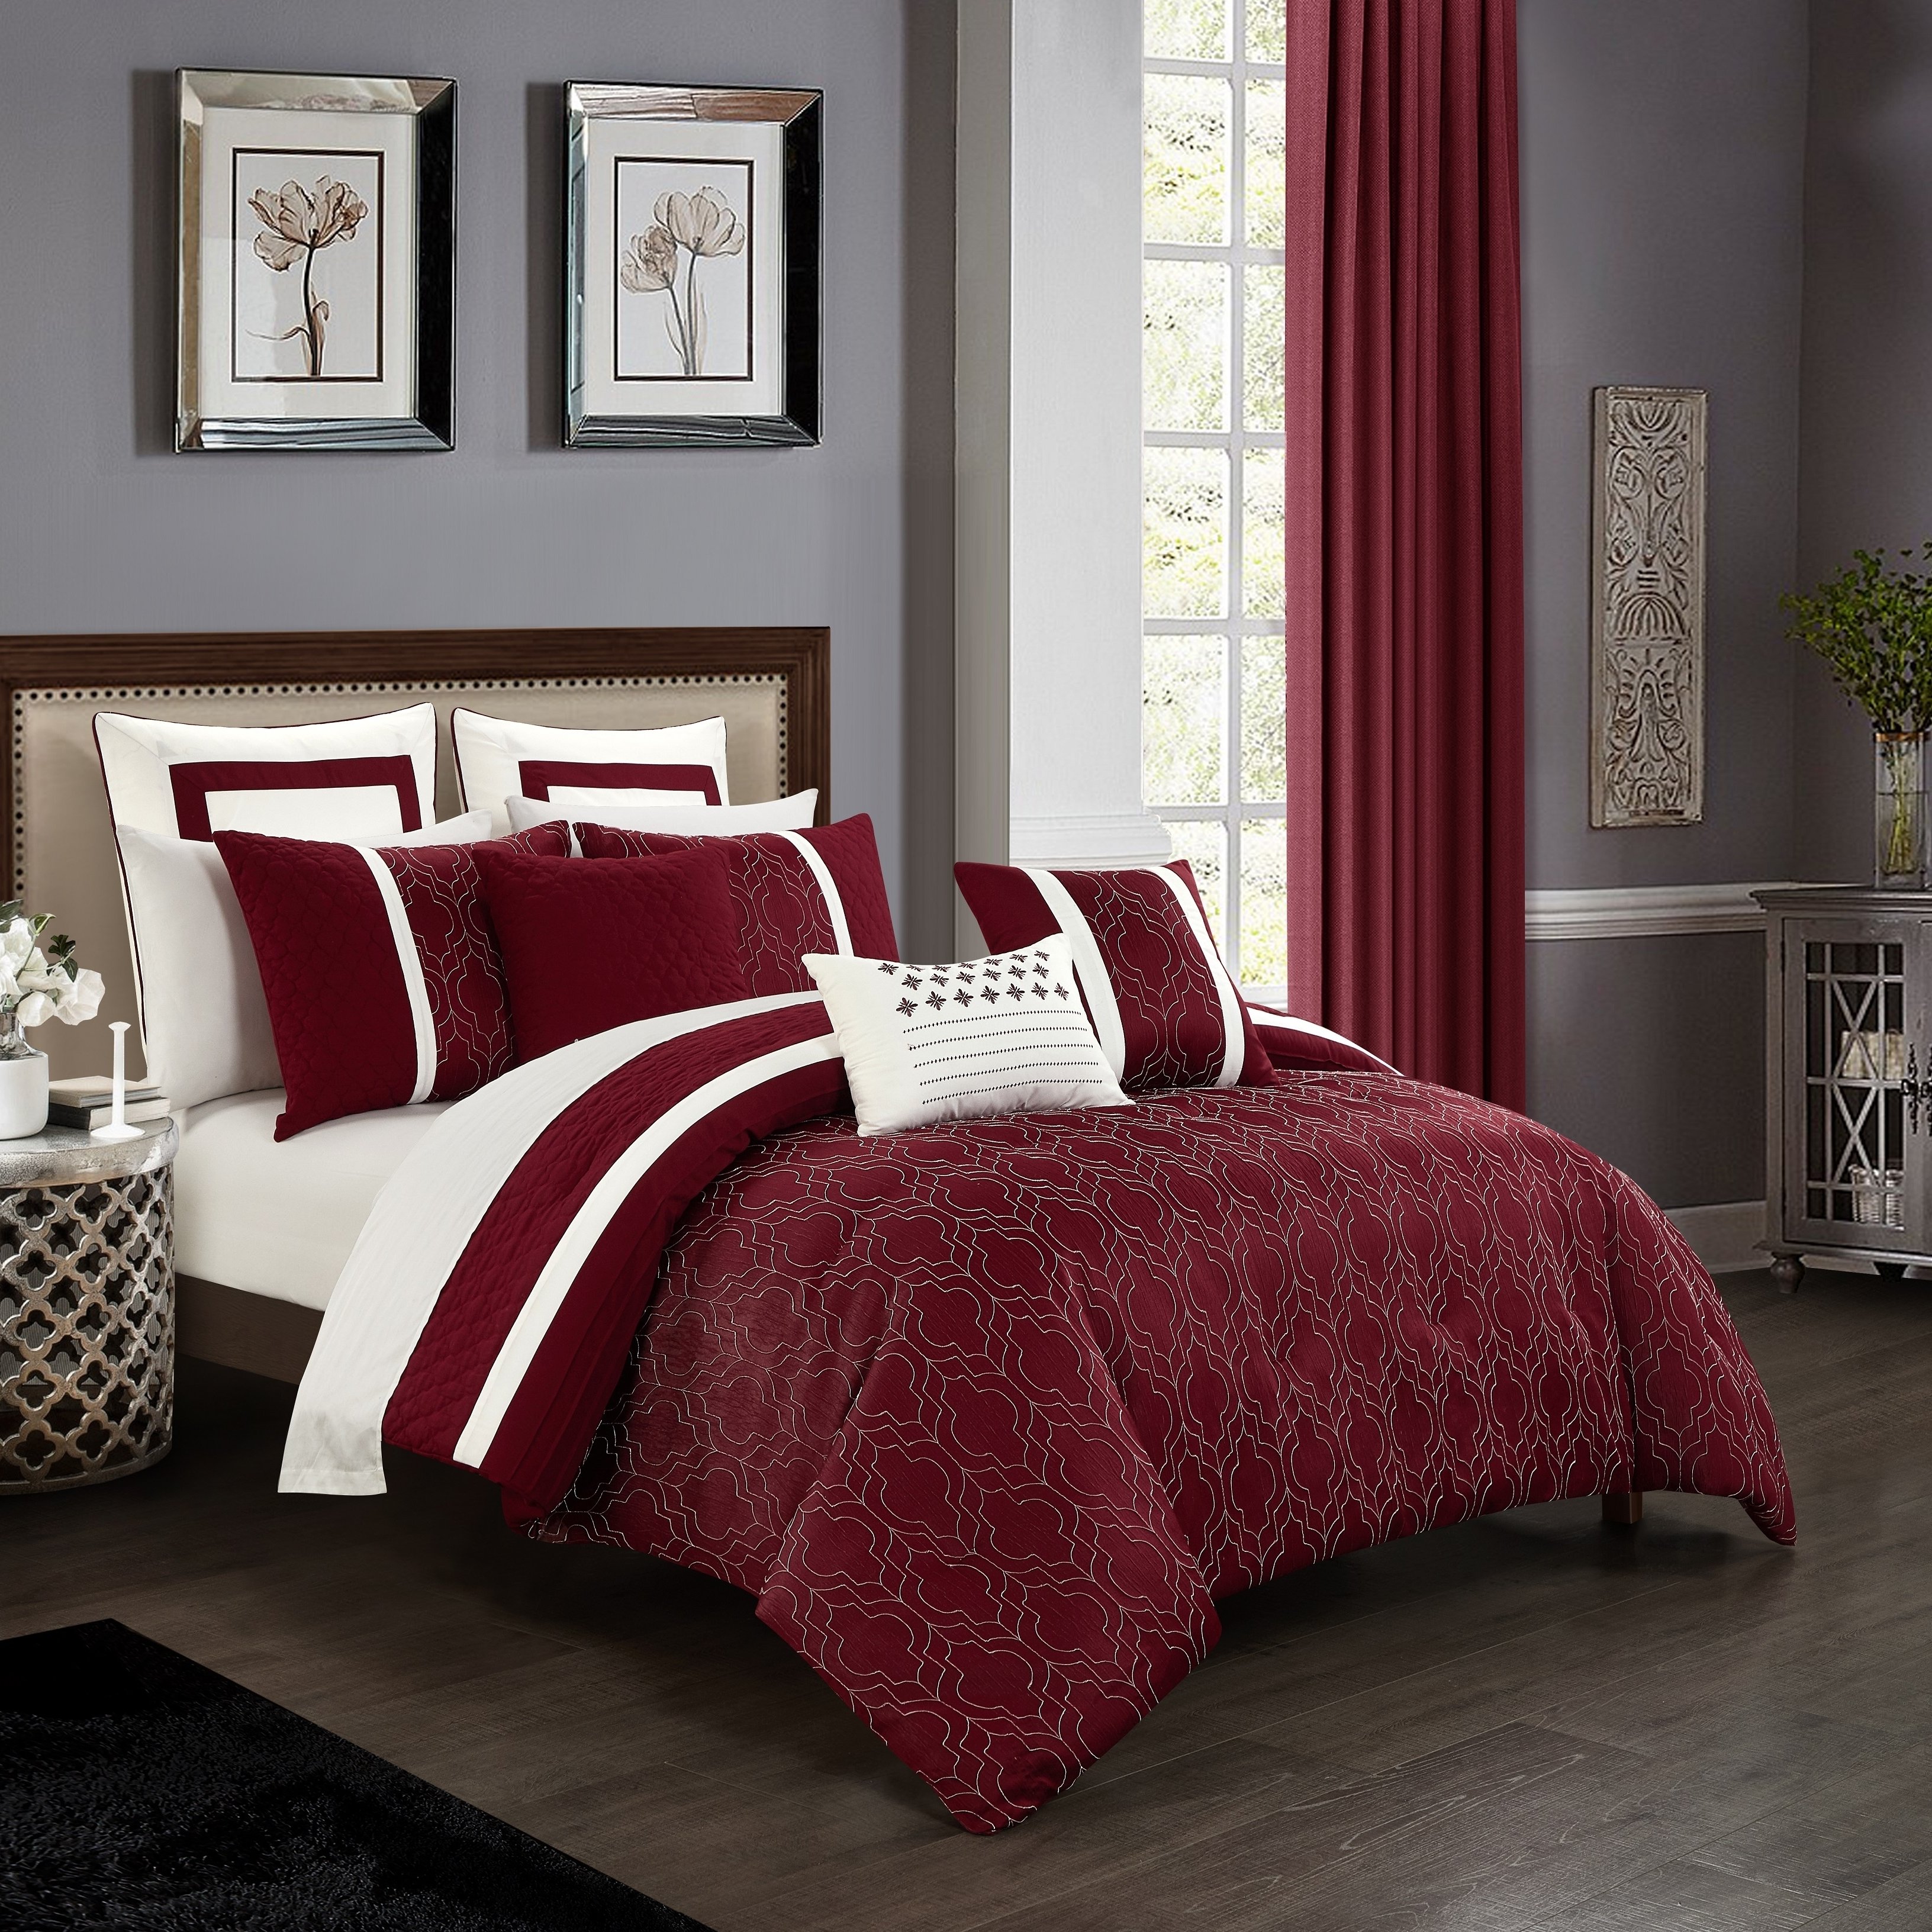 Arlow 8 Piece Comforter Set Jacquard Geometric Quilted Pattern Design Bedding - Berry, Queen